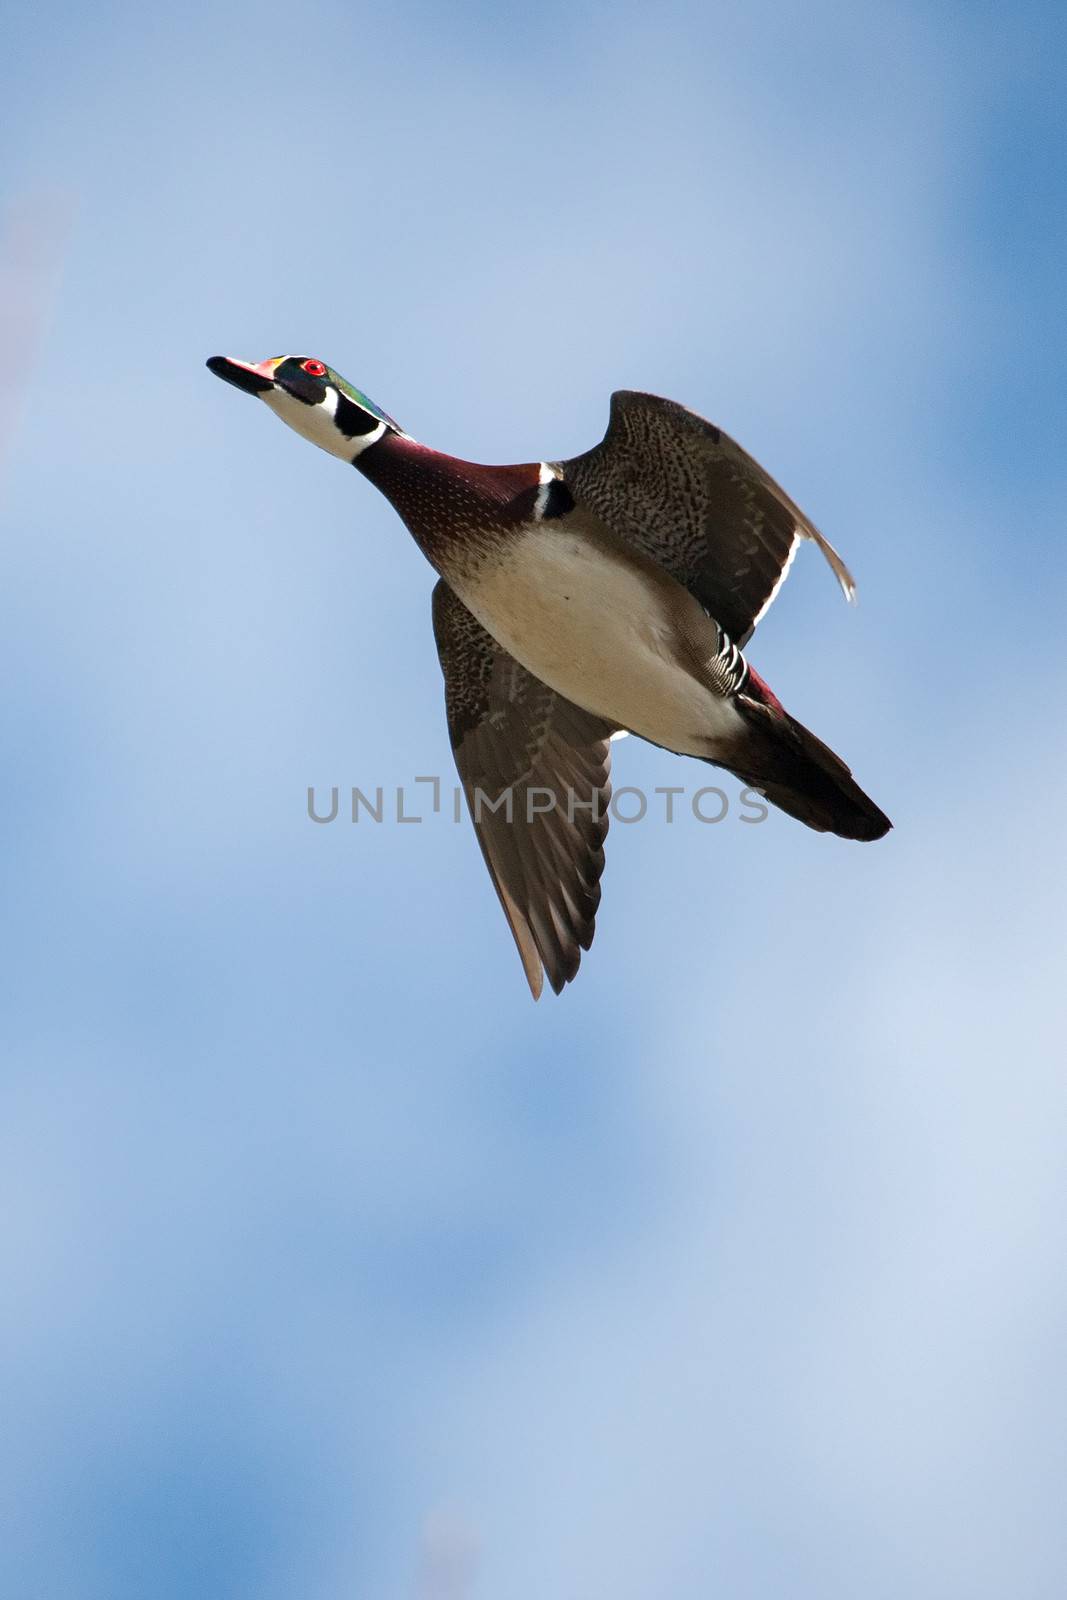 Male wood duck in flight with cloud and blue sky background